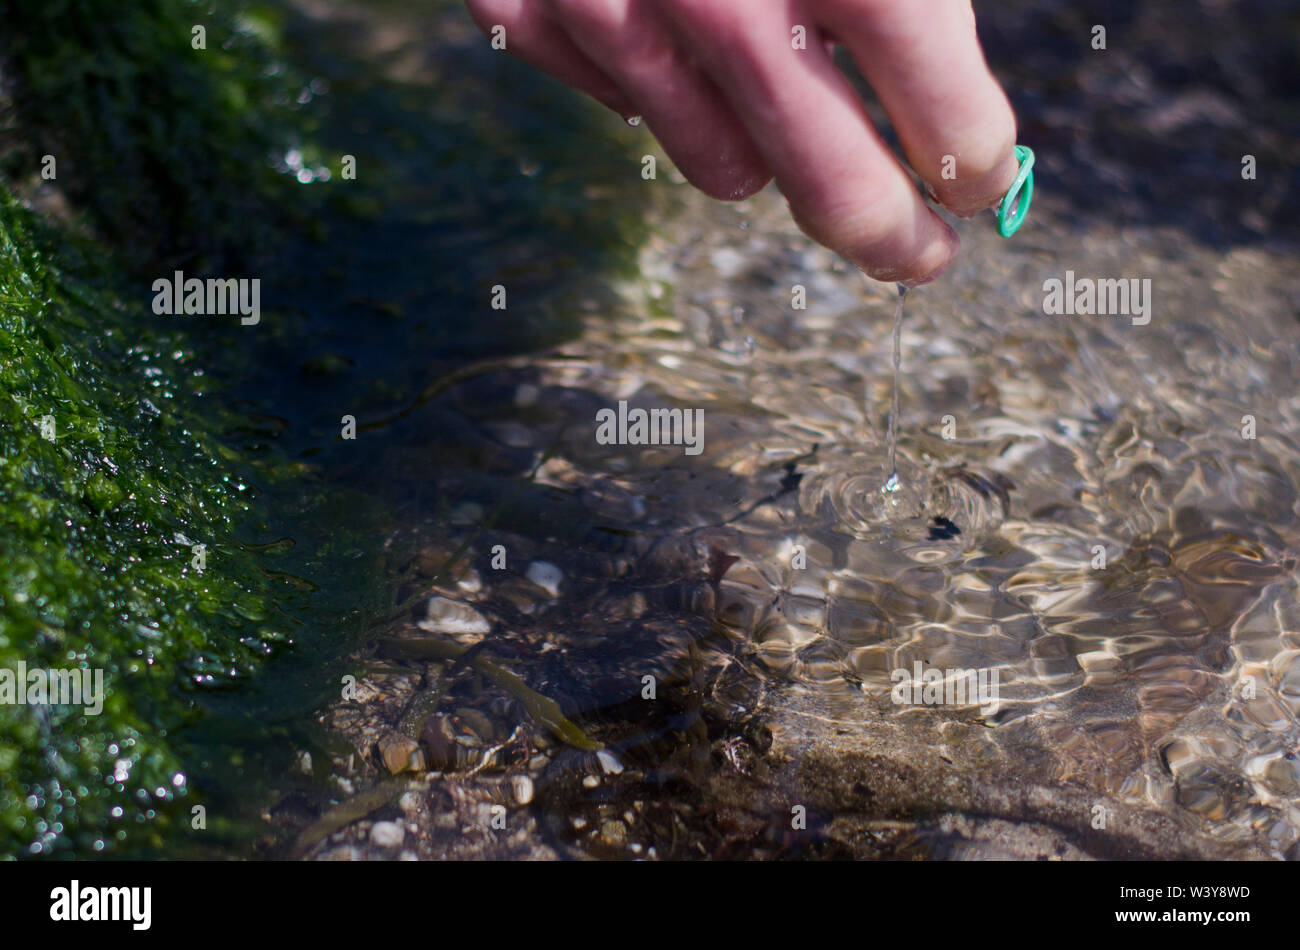 Hand Taking Rubber Band out of Rockpool Stock Photo